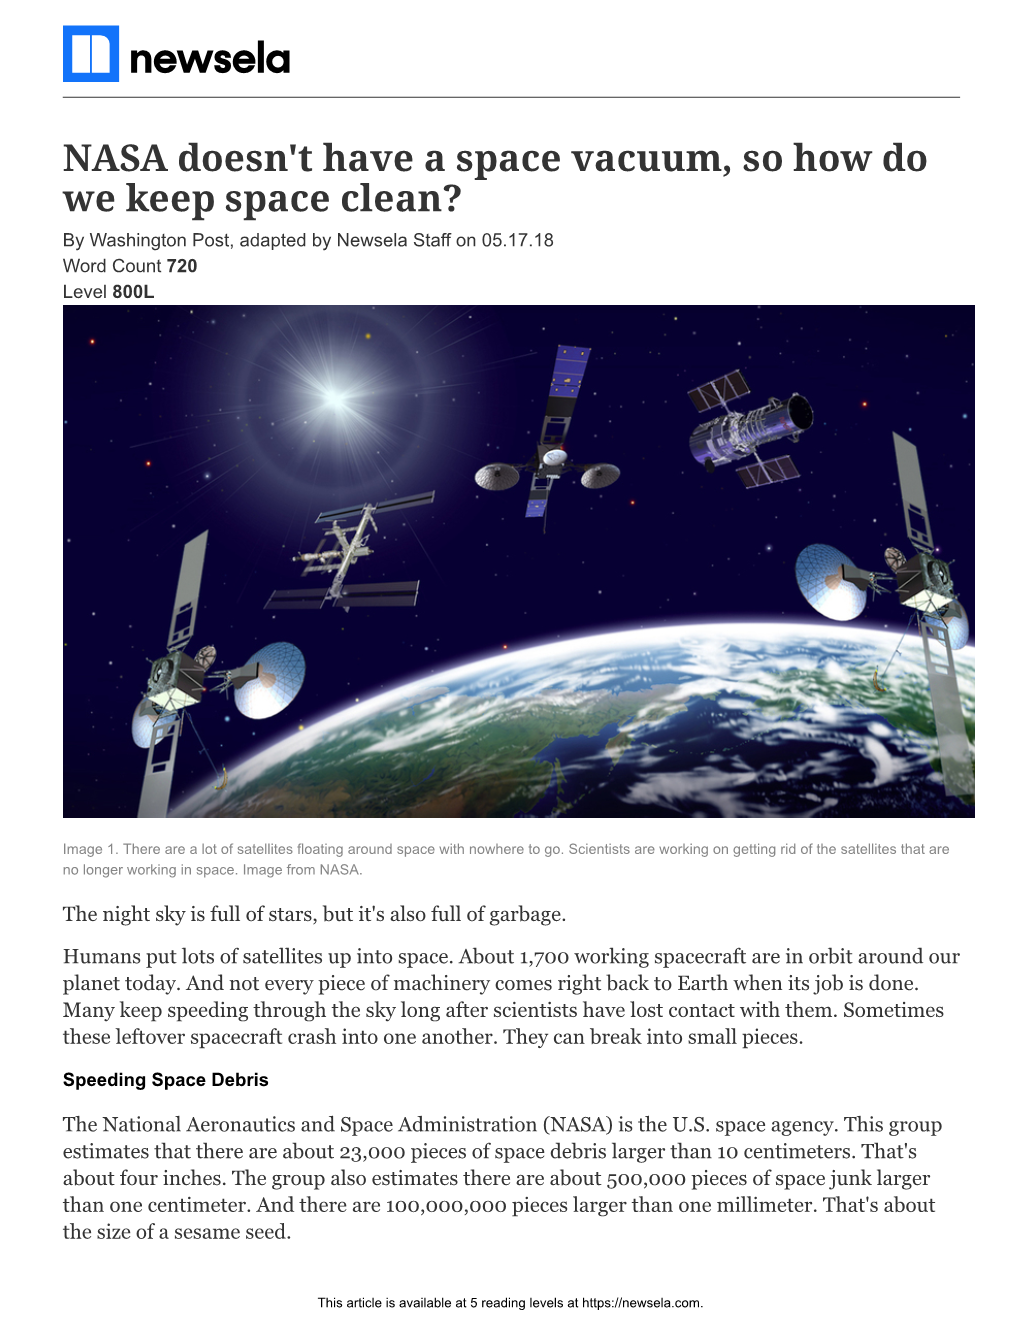 NASA Doesn't Have a Space Vacuum, So How Do We Keep Space Clean? by Washington Post, Adapted by Newsela Staff on 05.17.18 Word Count 720 Level 800L